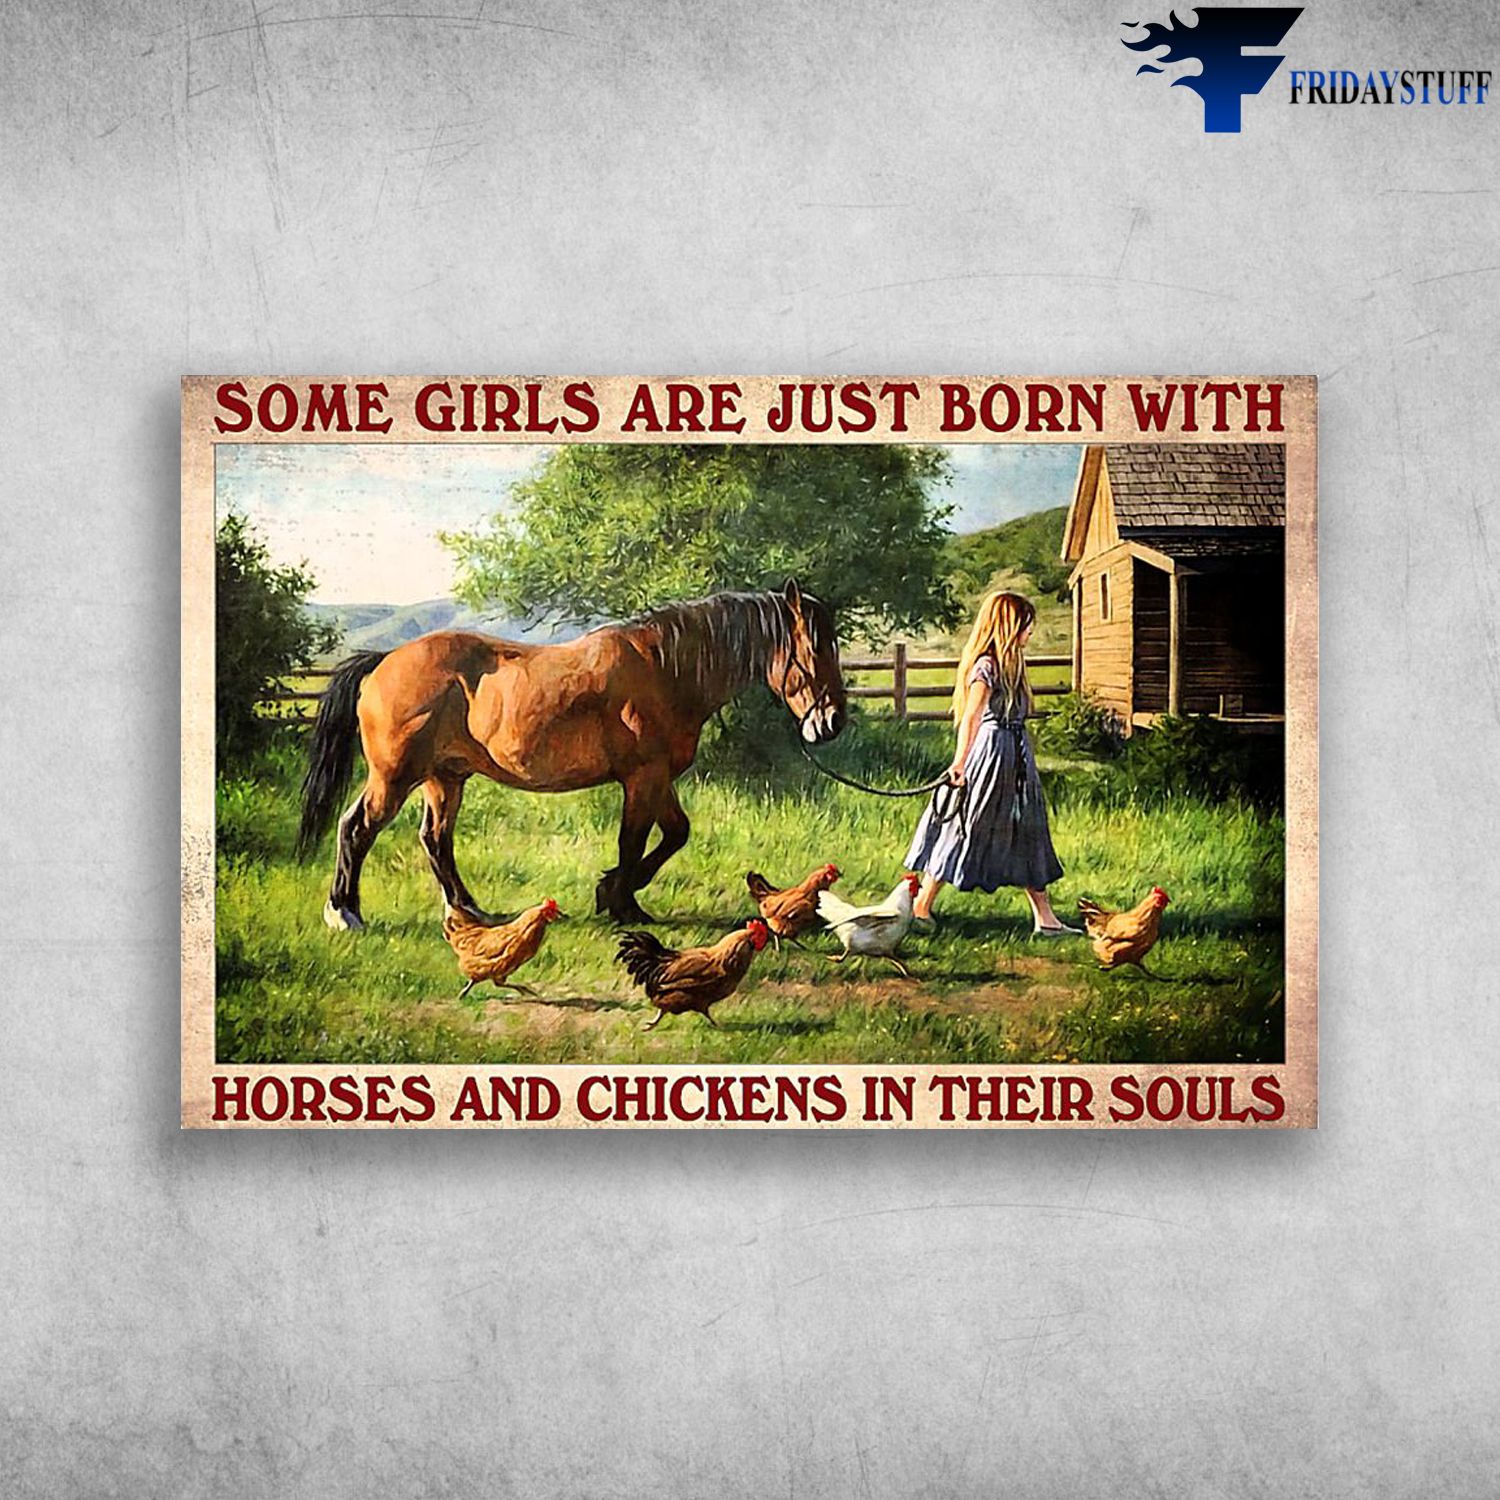 Girl Love Horses And Chickens - Some Girl Just Born With Horses And Chickens In Their Souls